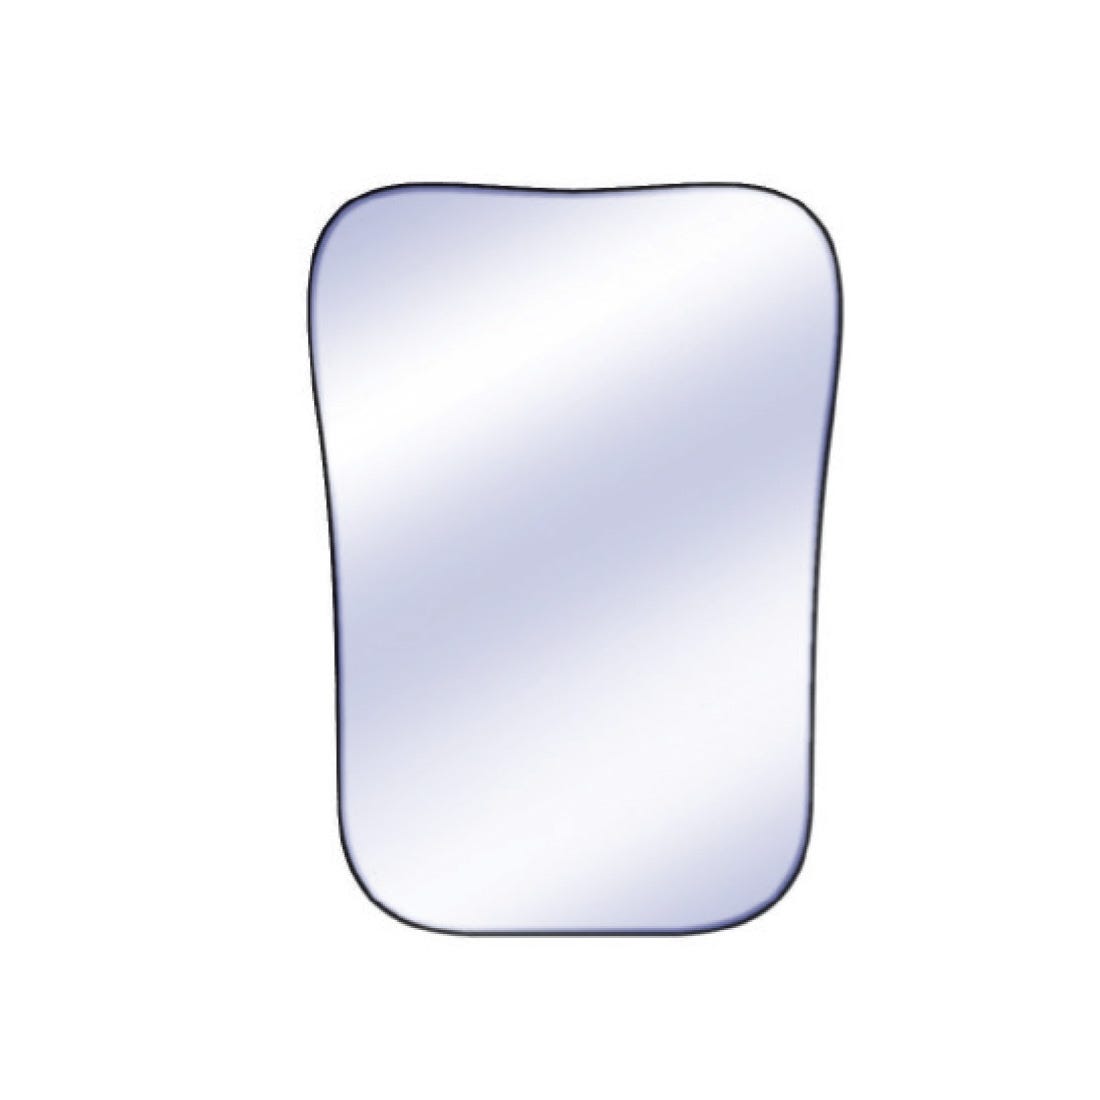 ACE Occlusal Intraoral Photo Mirror- Adult #3 -double sided